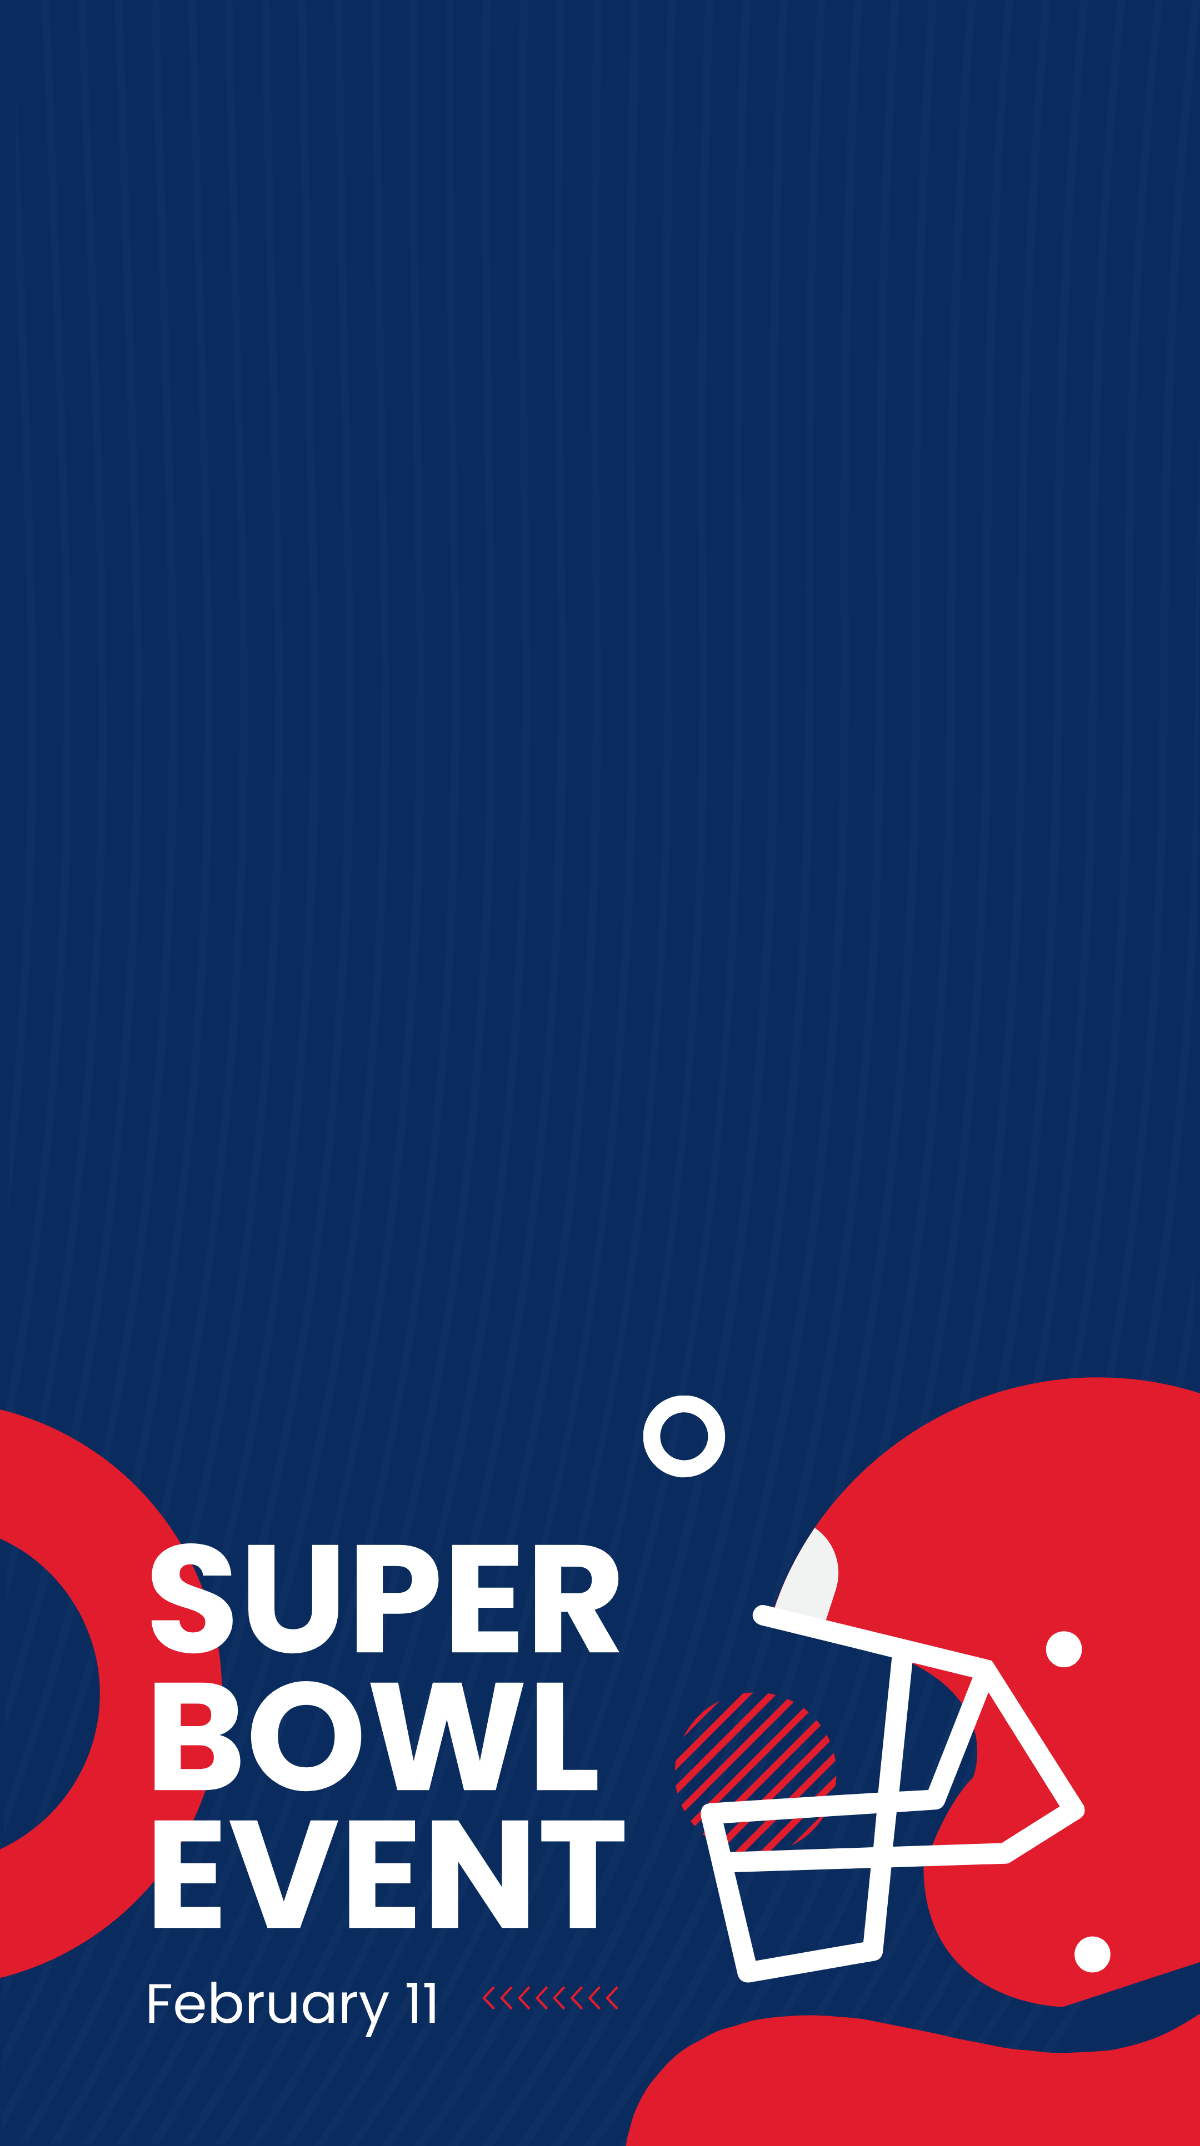 Super Bowl Event Snapchat Geofilter Template